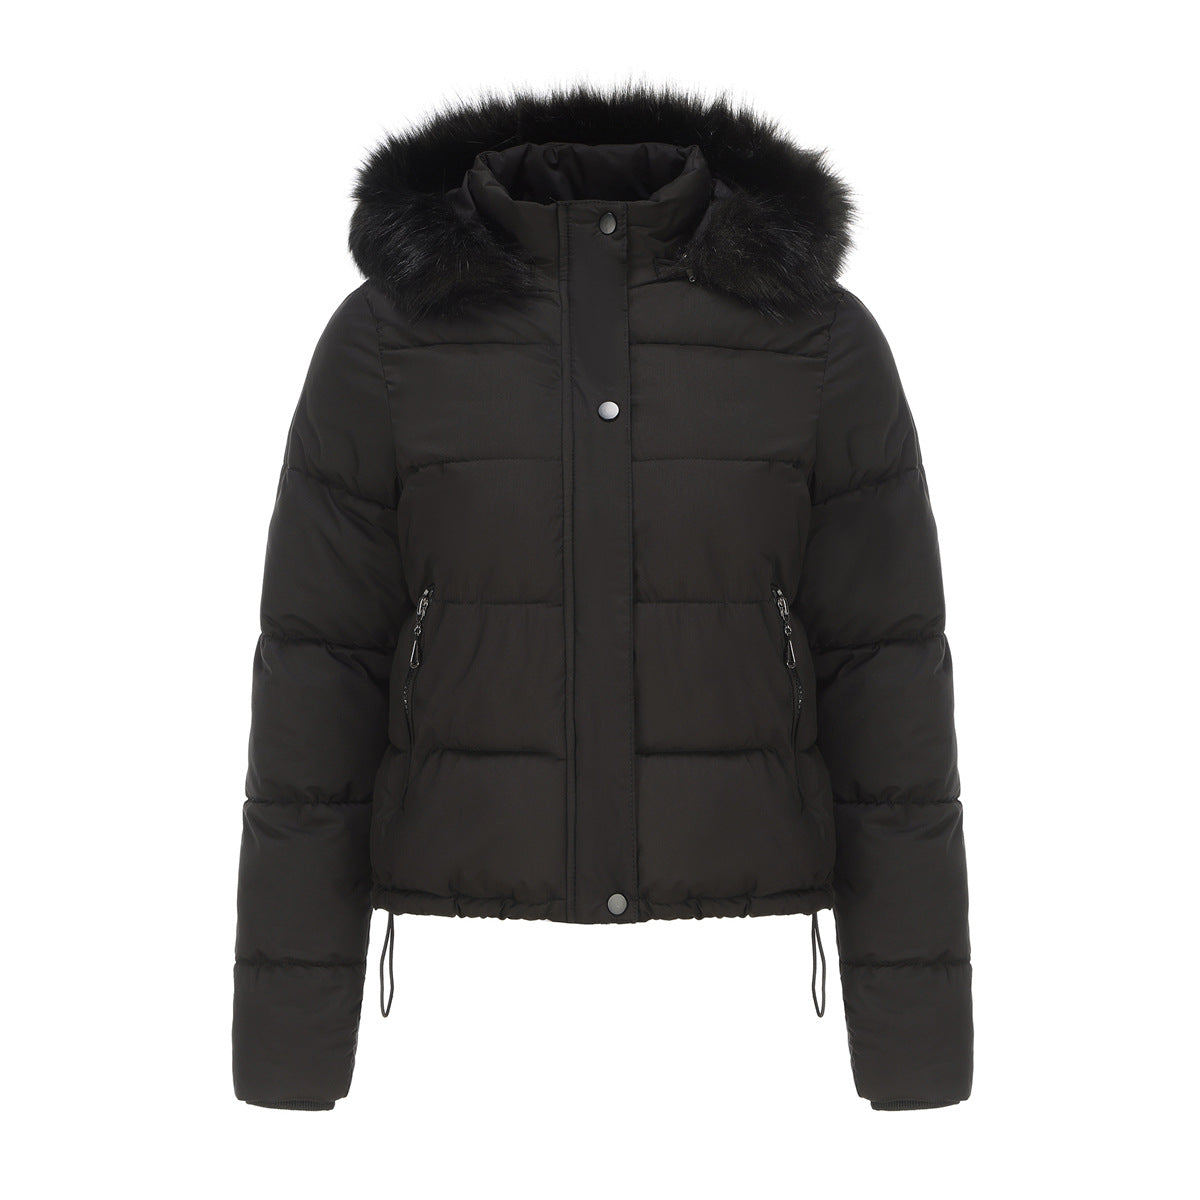 Long Sleeves Cotton Padded Hooded Jacket